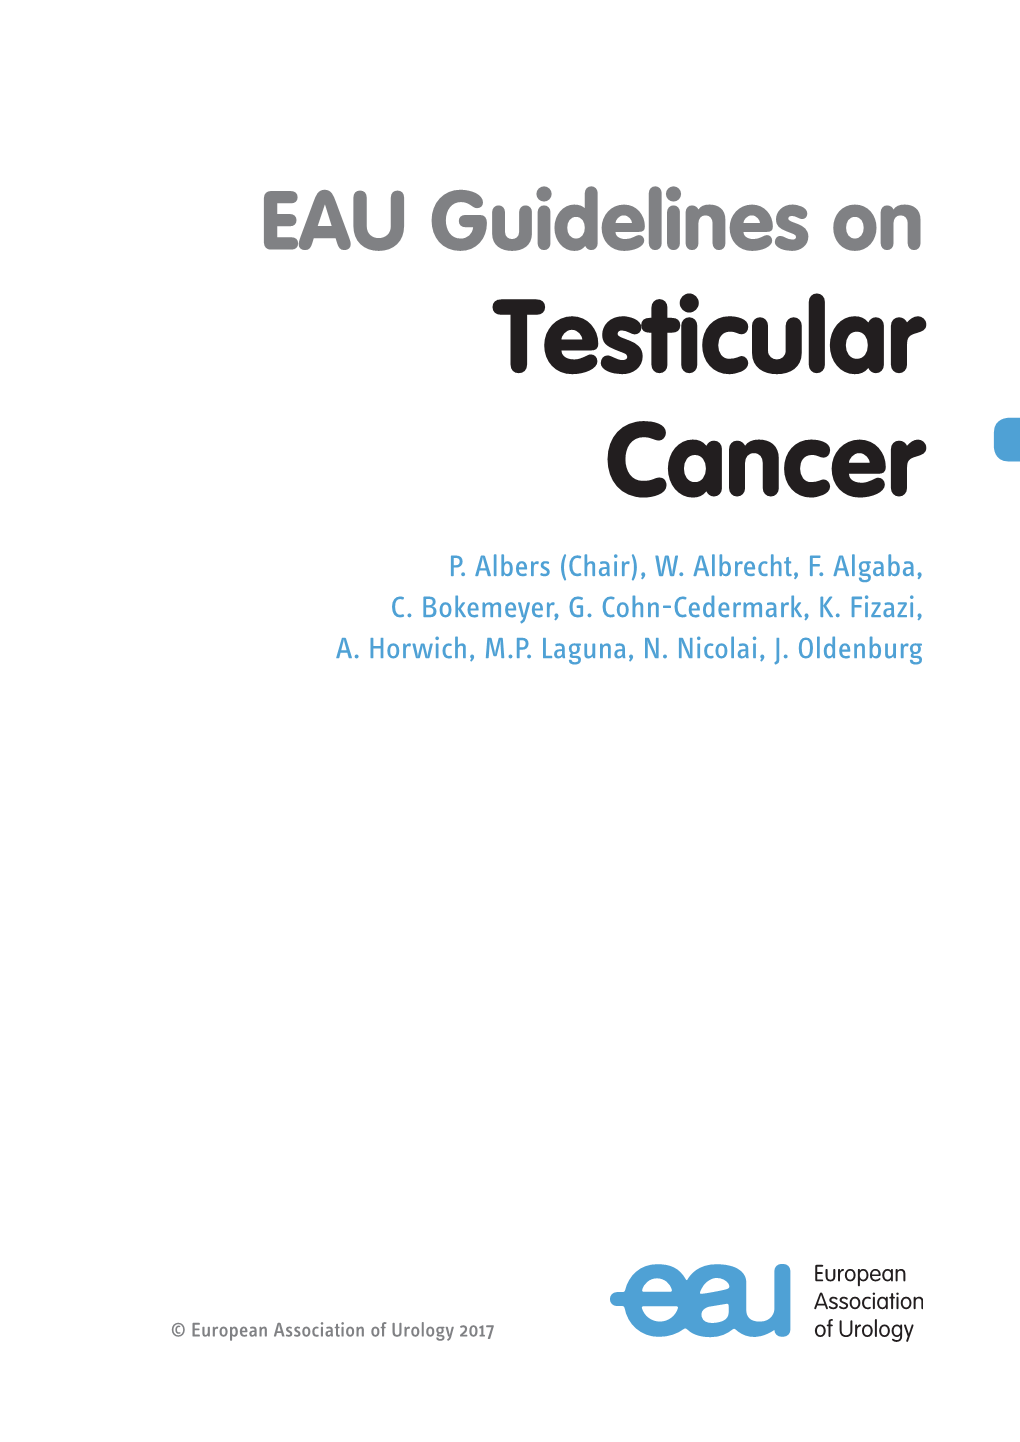 EAU Guidelines on Testicular Cancer 2017